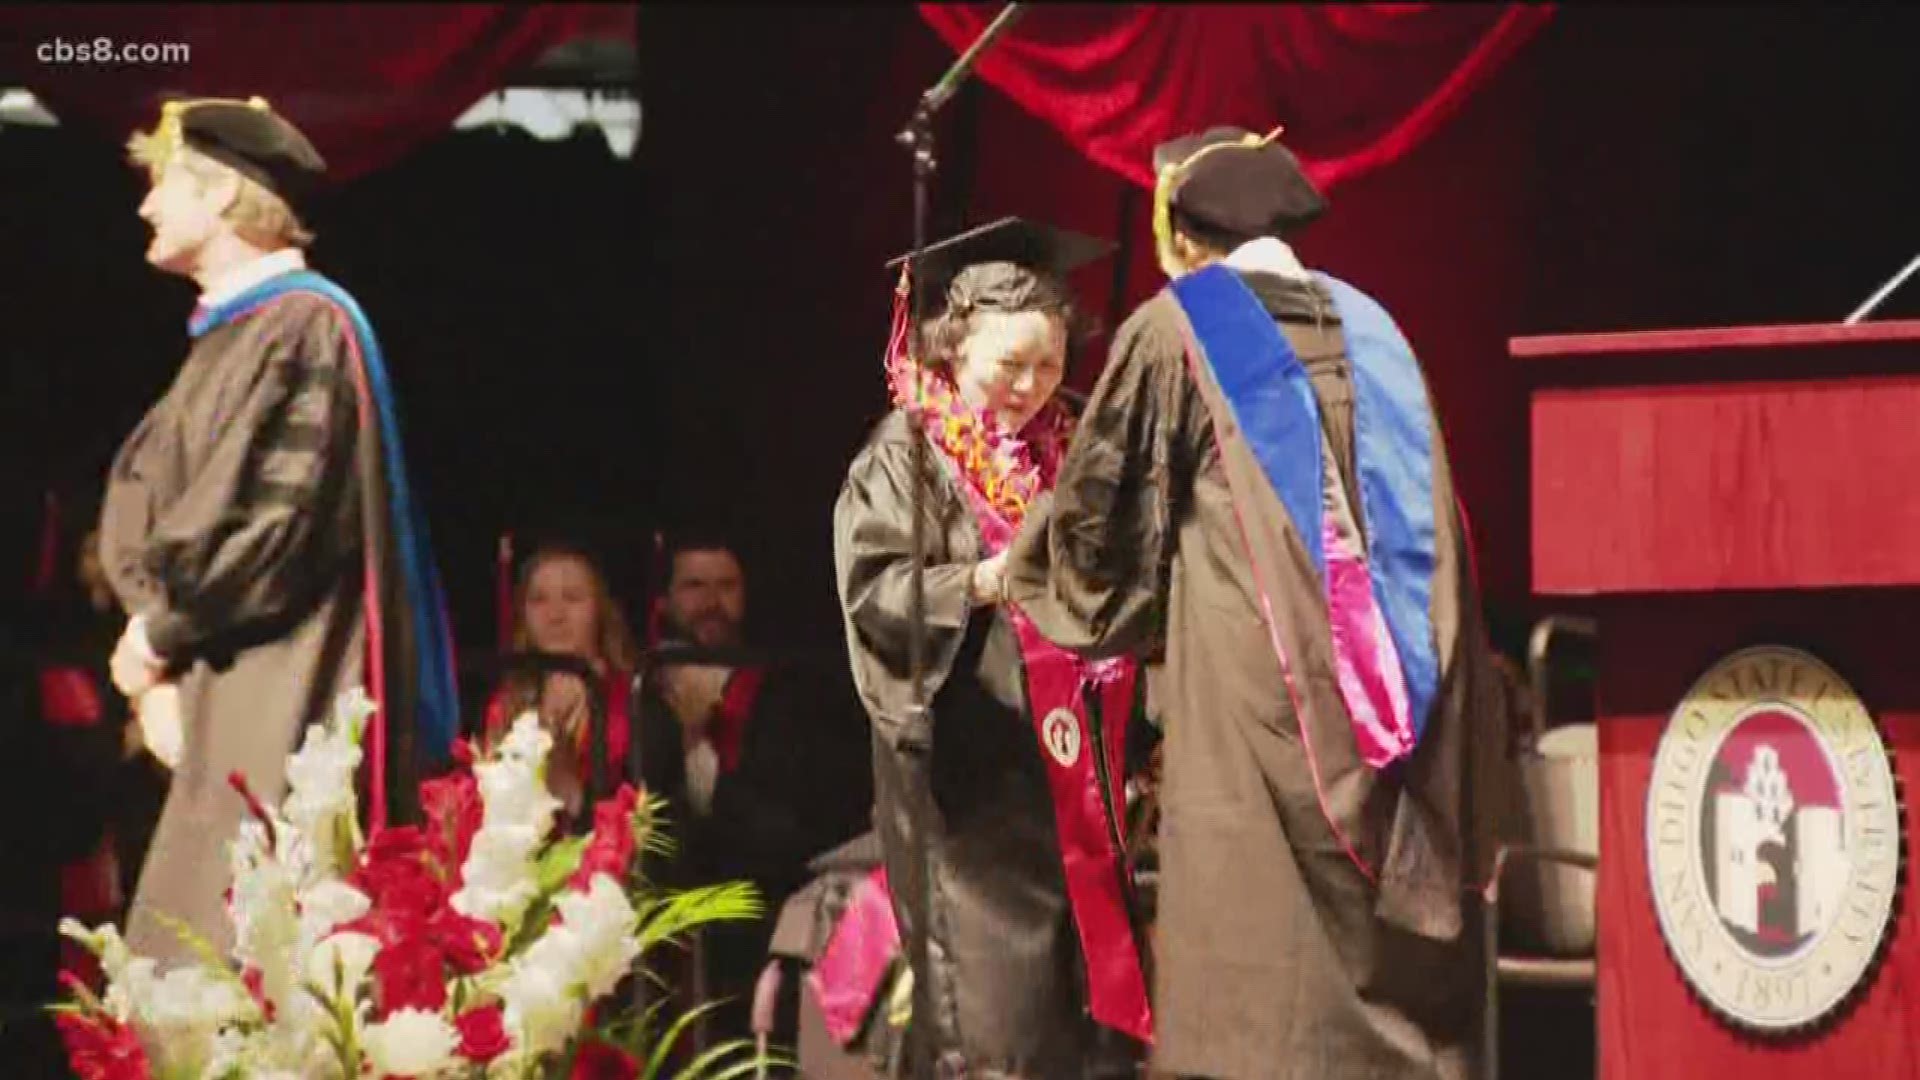 Among the thousands of graduating students at SDSU is one special graduate – 80-year-old Yasuko Fujii.